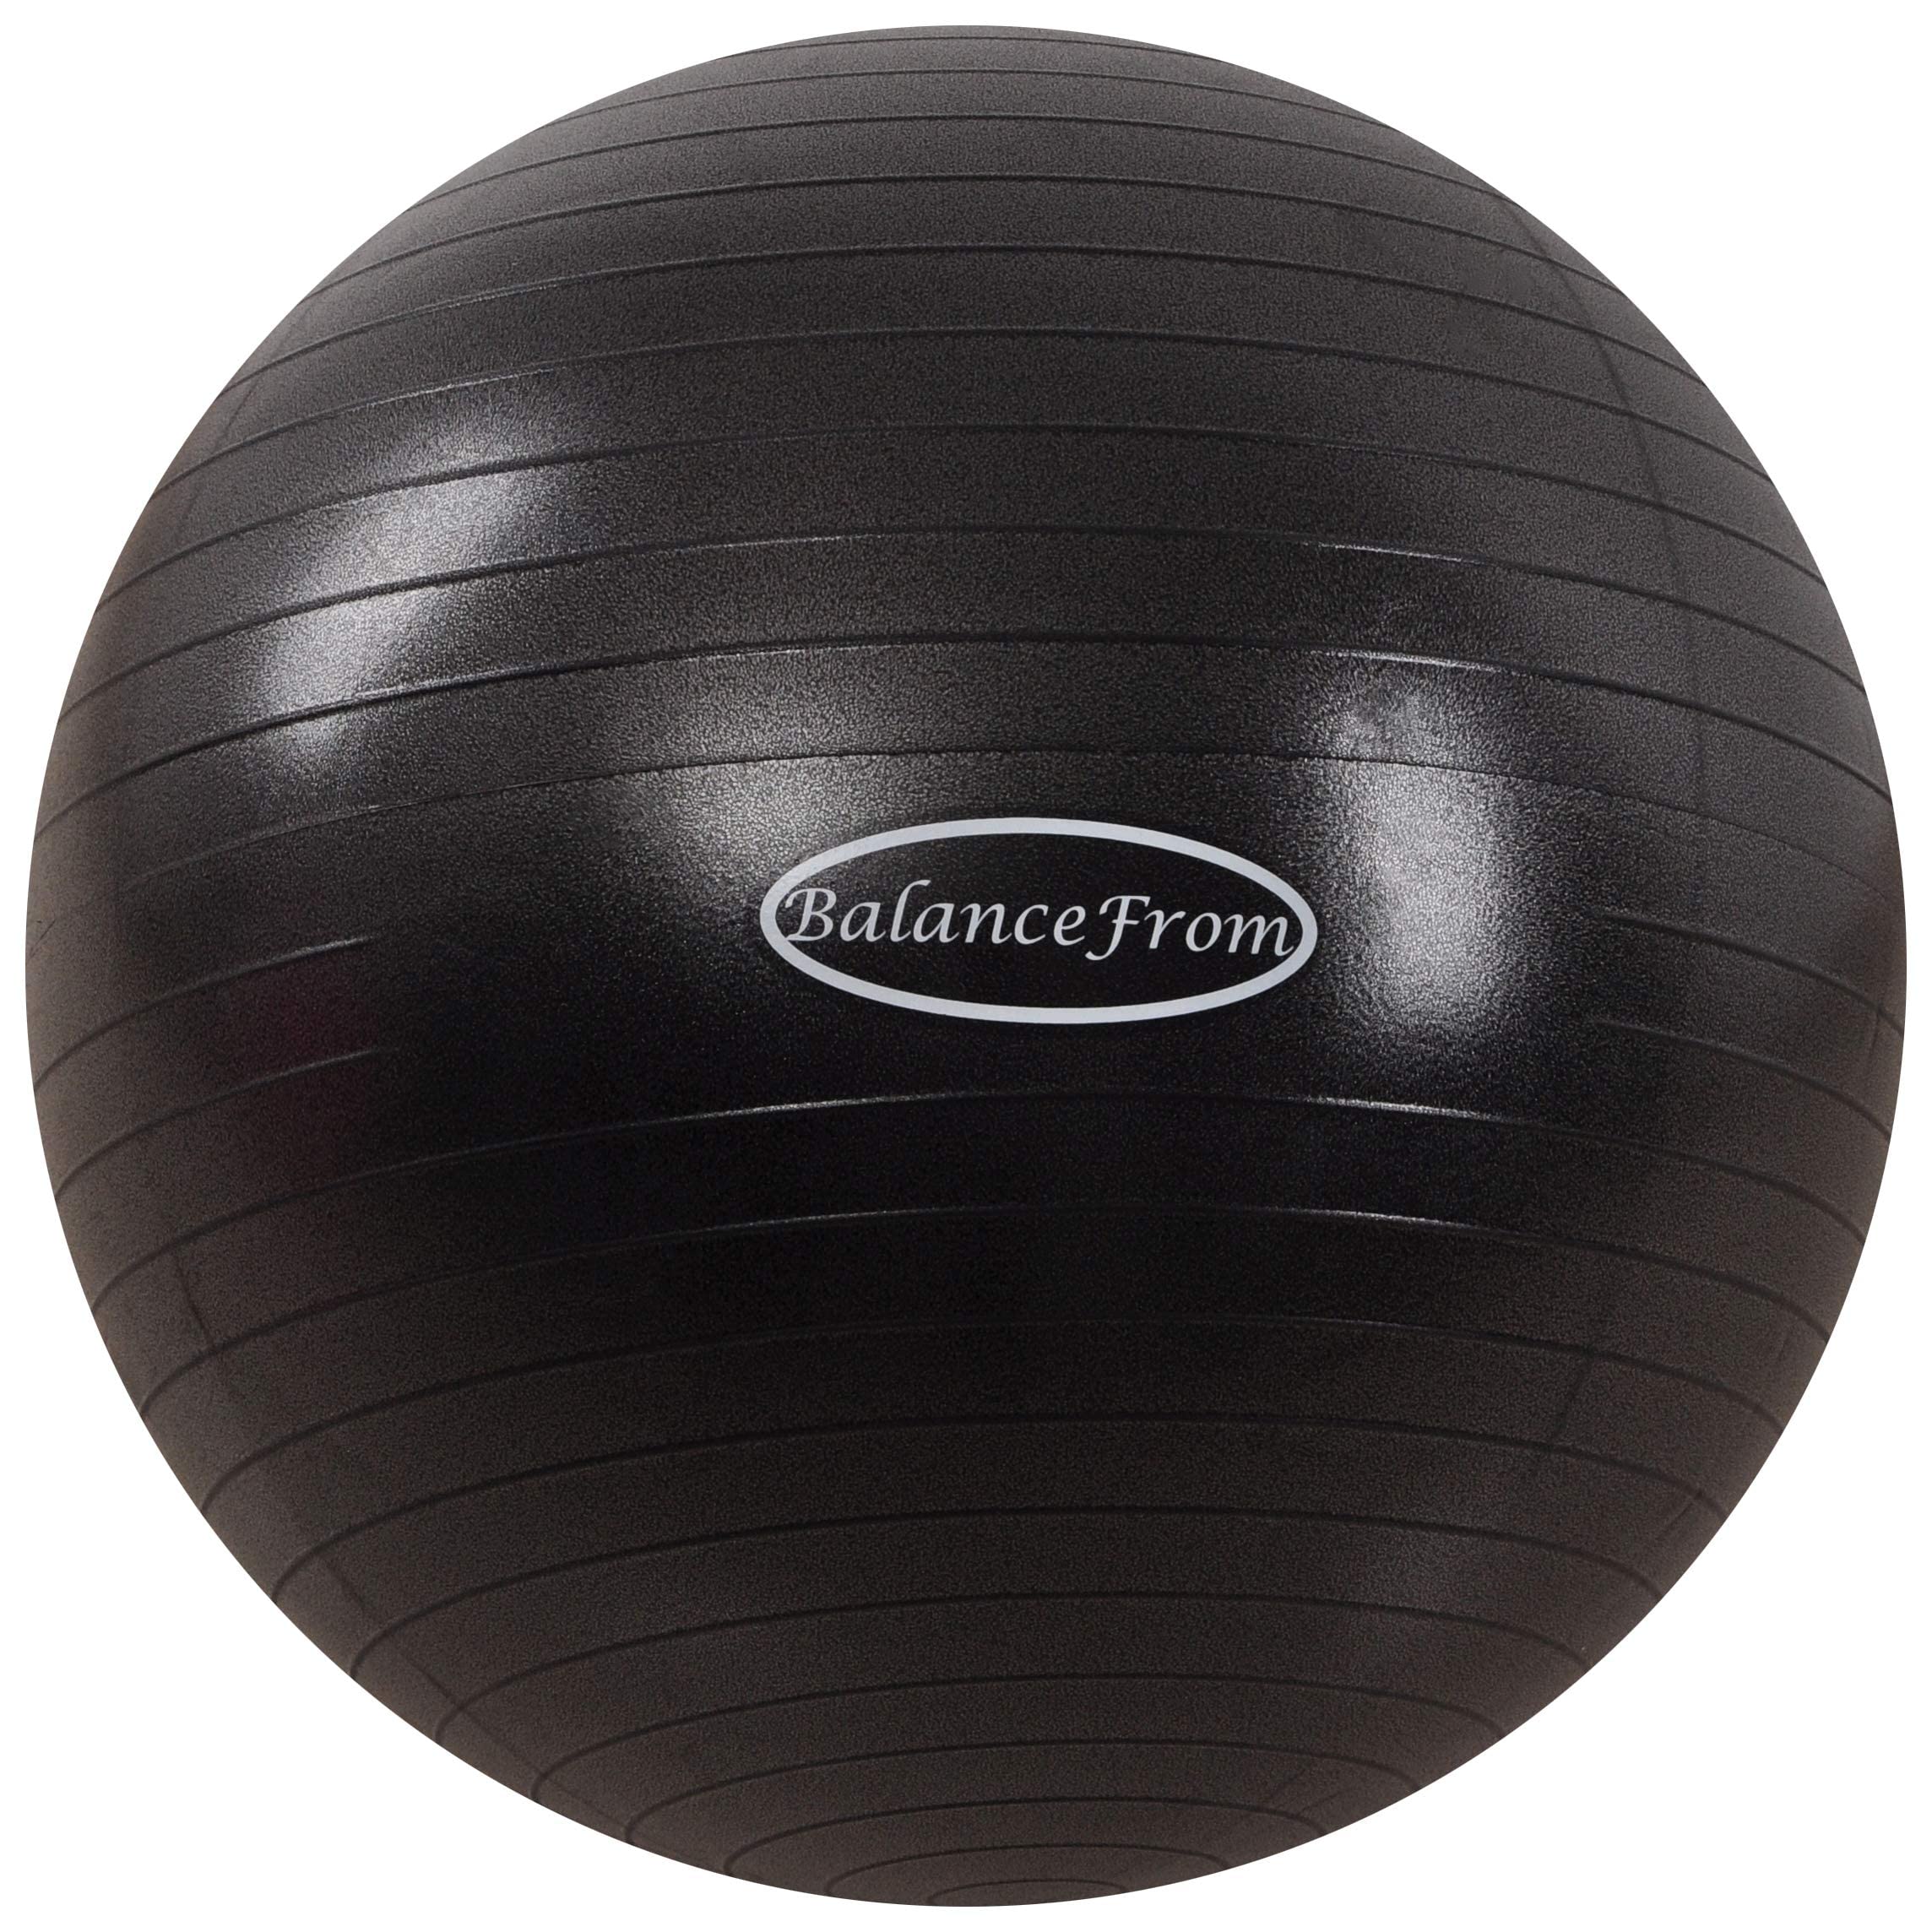 BalanceFrom Anti-Burst and Slip Resistant Exercise Ball Yoga Ball Fitness  Ball Birthing Ball with Quick Pump 2 000-Pound Capacity Black 22-inch M